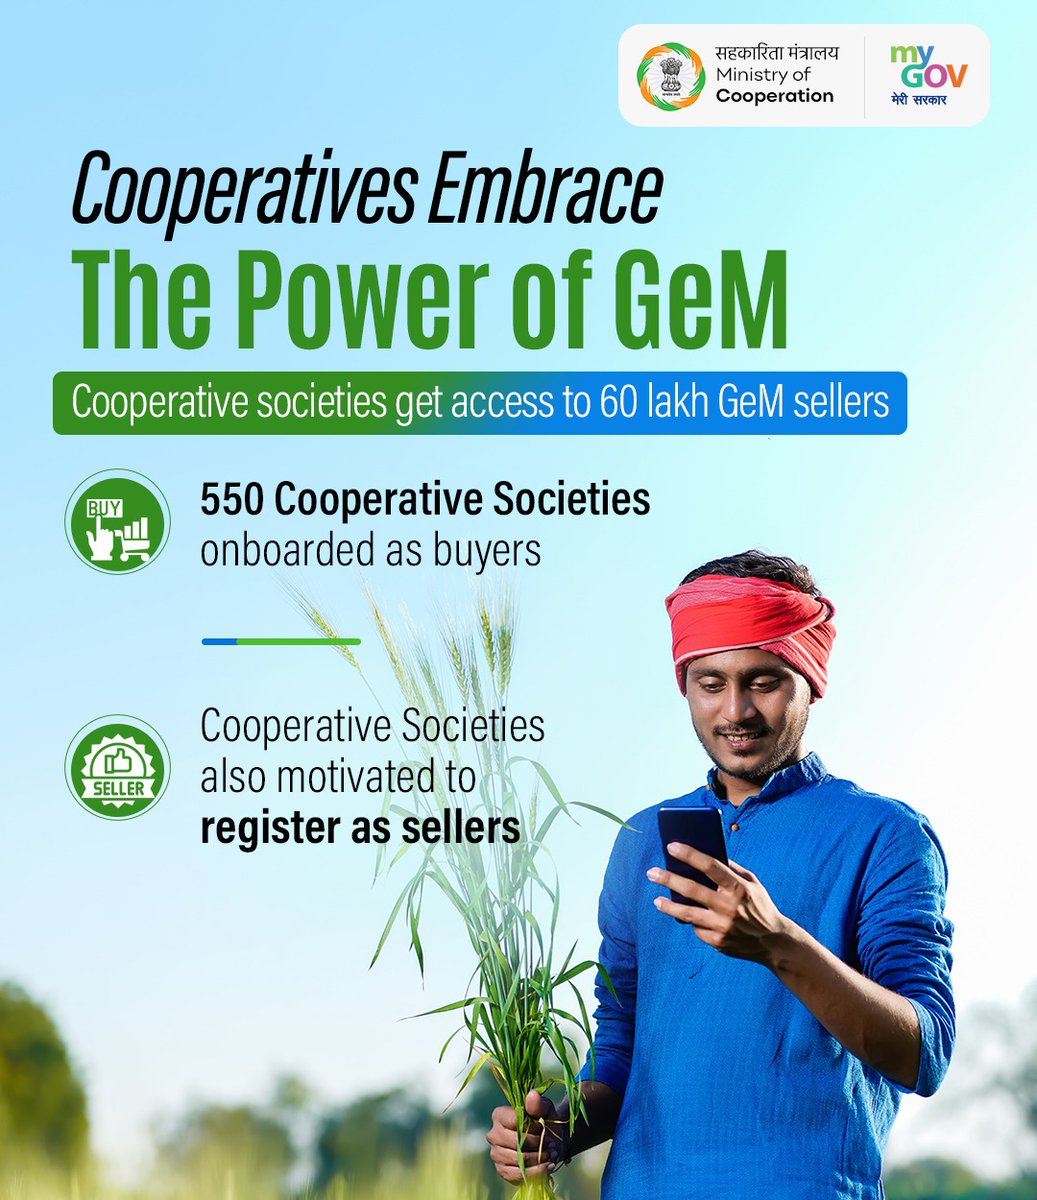 Cooperatives embrace GeM's immense potential, connecting with 60 lakh sellers for a prosperous future. With 550 societies onboard as buyers, they are encouraged to become sellers, strengthening collaboration and unlocking new avenues of success.

#GeM #CooperativeSociety